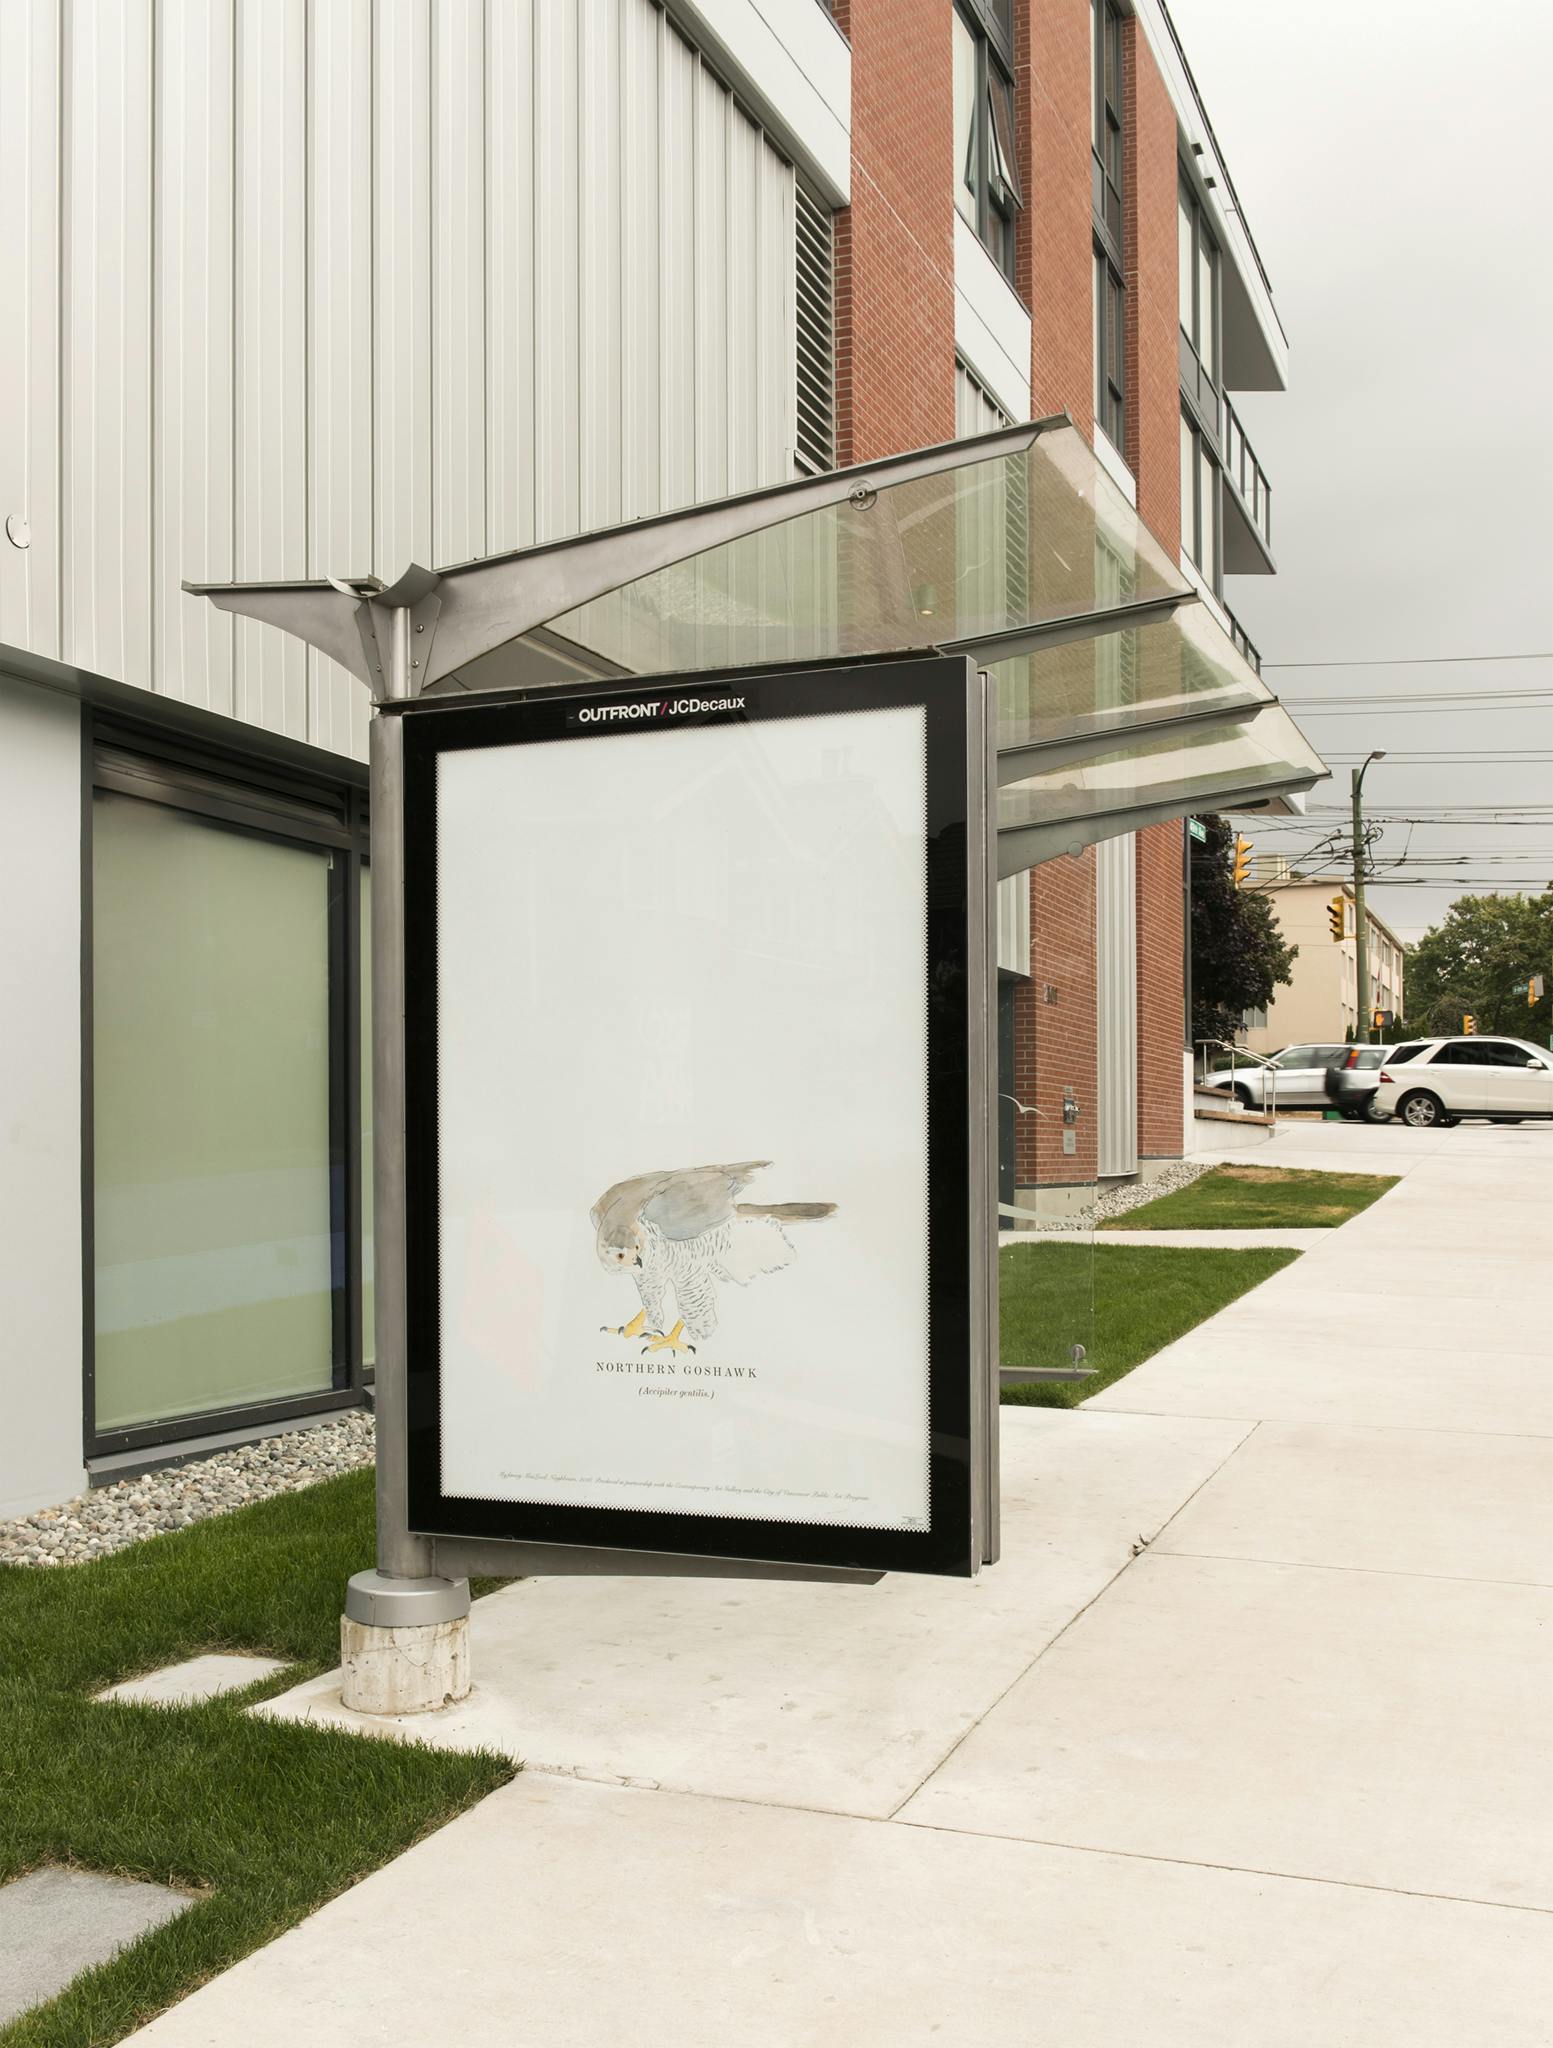 An image of a bus shelter with a large-scale watercolour print of a Northern Goshawk. The print is installed where an advertisement would normally be displayed.  